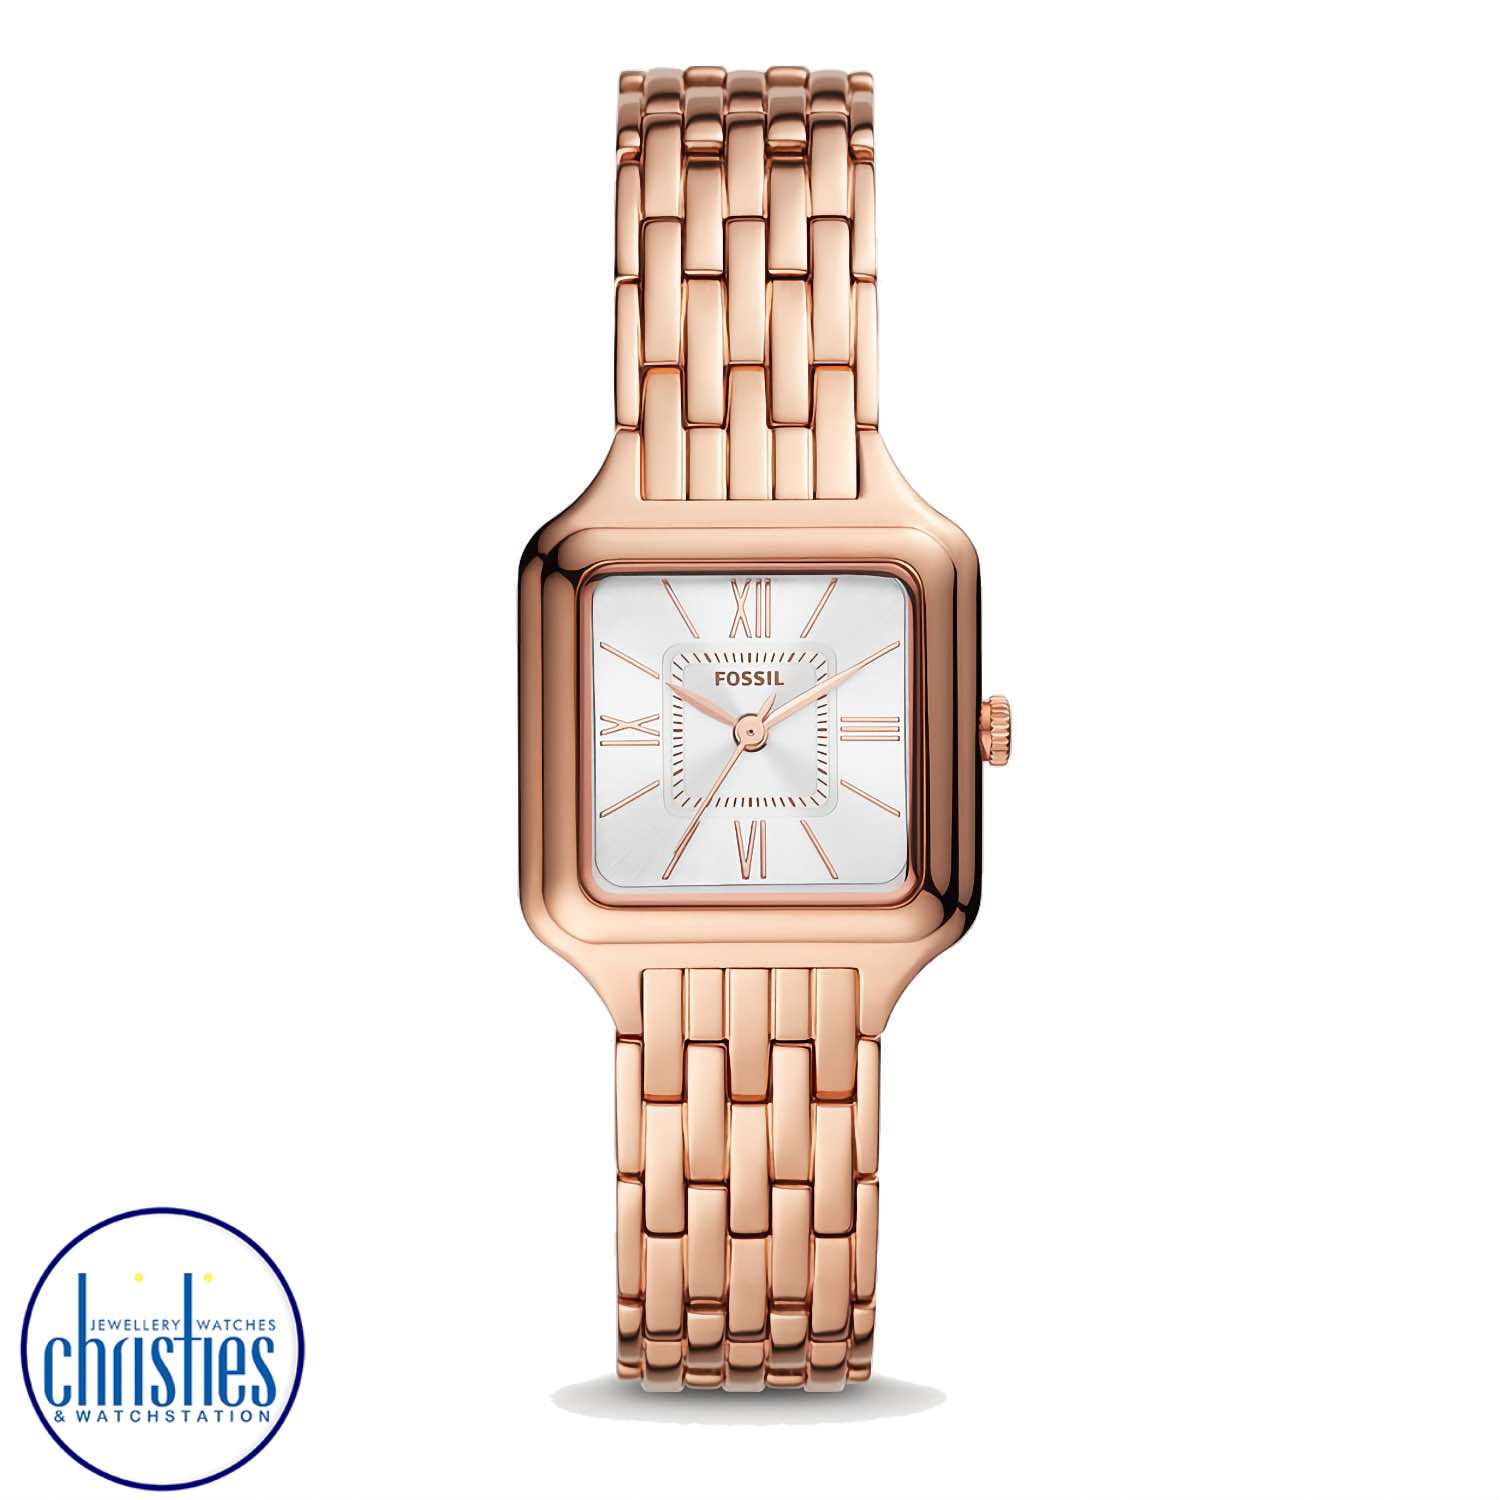 ES5080 Fossil Raquel Rose Gold Tone Watch.FOSSIL SMARTWATCHES